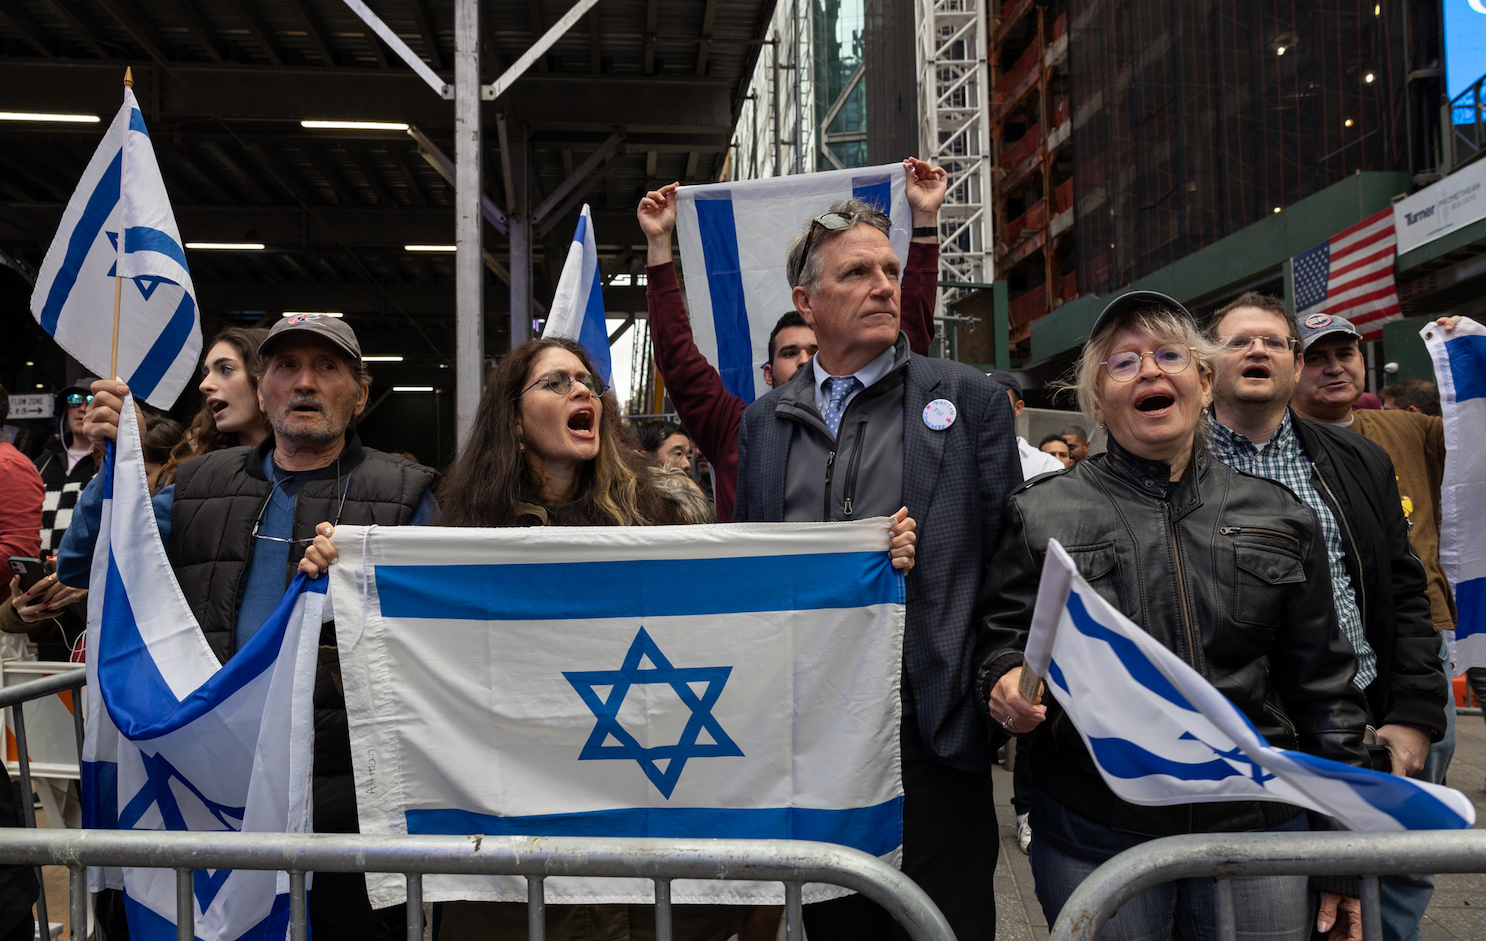 A group of people standing behind a fence shouting while holding various-sized Israeli flags.